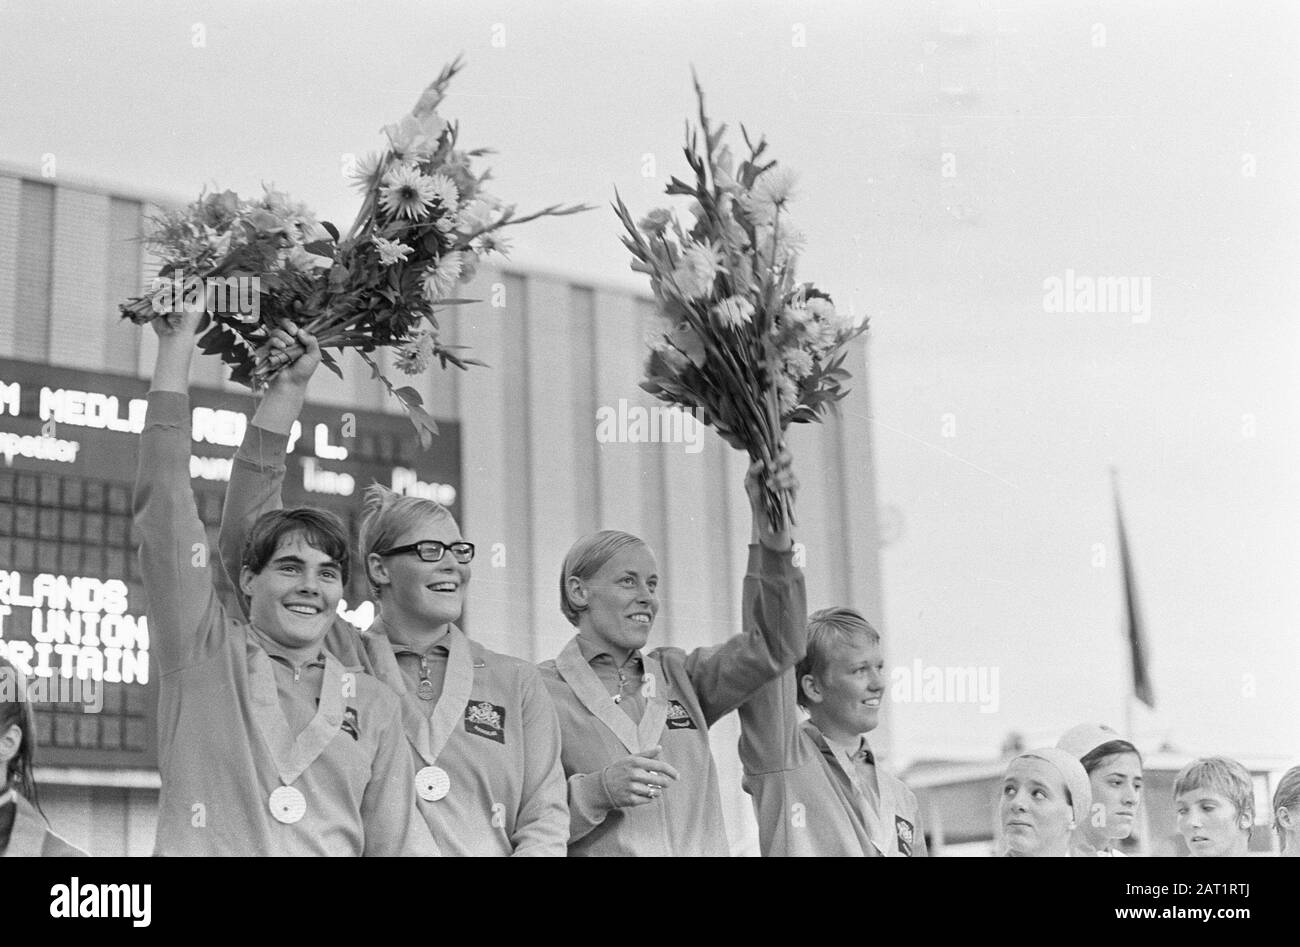 European Swimming Championships, 4 x 100 meters change on scaffold Toos, Ada, Gretta and Cobi, 6 waving to public Date: 25 August 1966 Keywords: Swimming Championships Person name: Toos Stock Photo